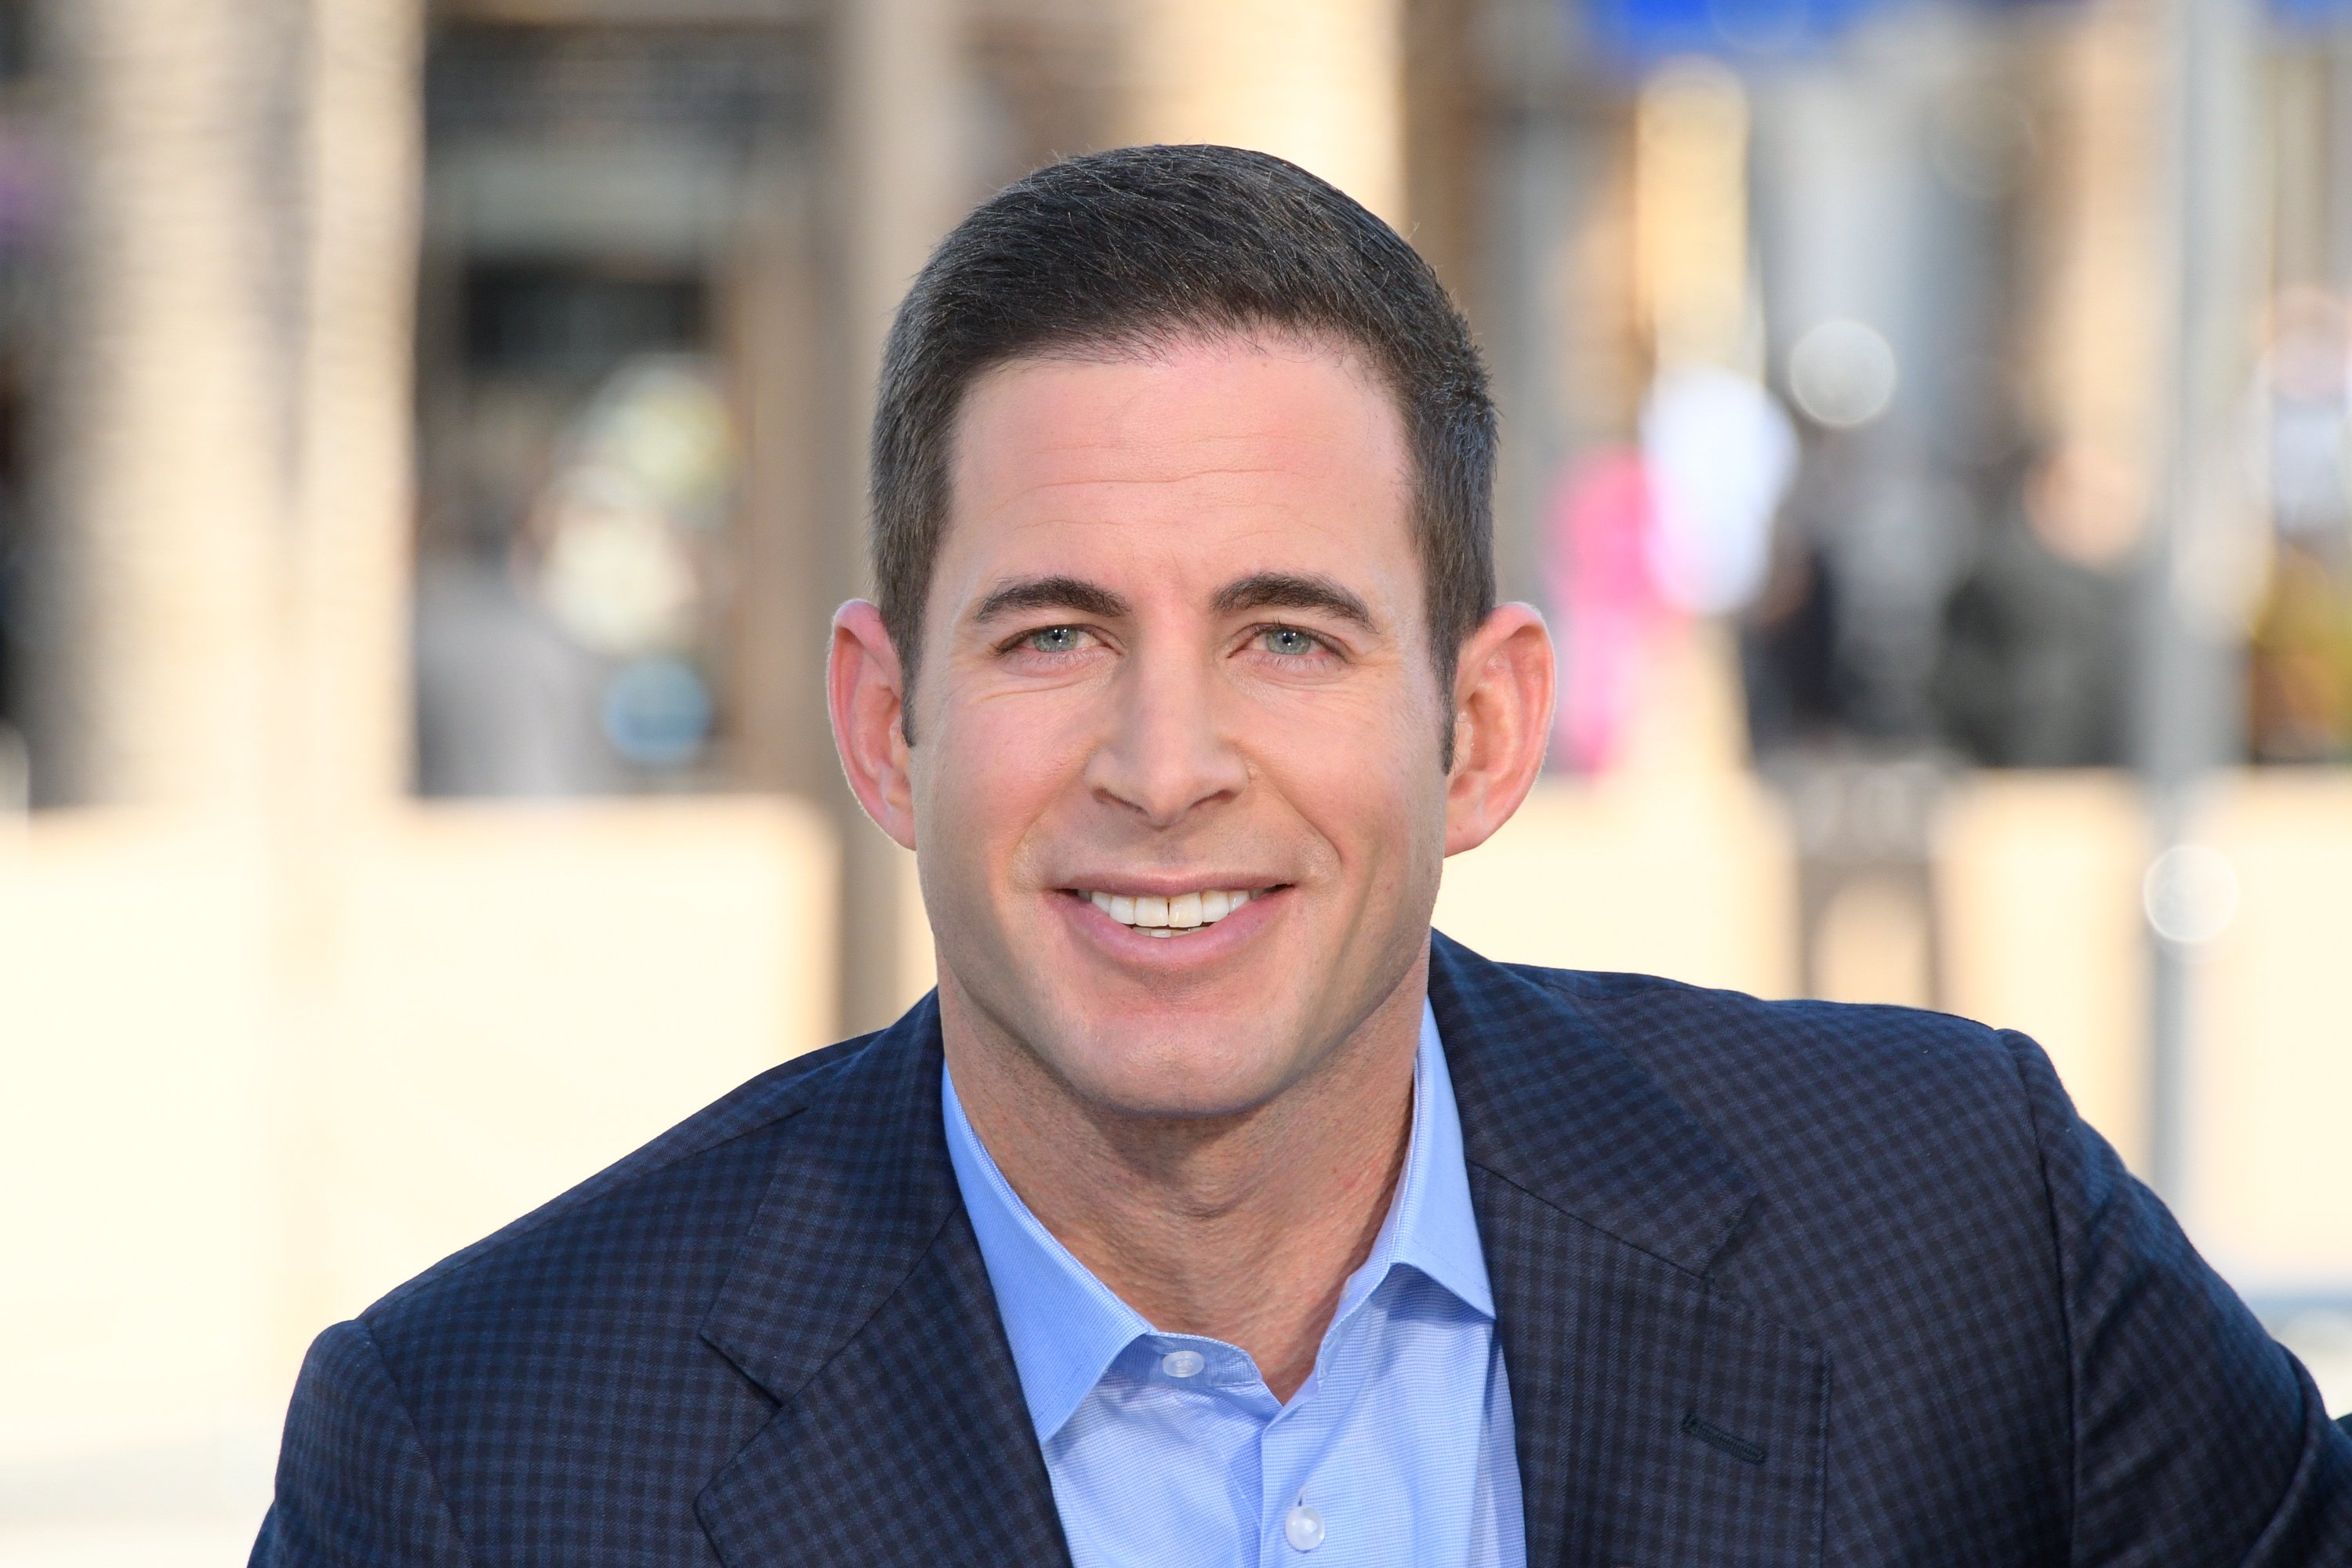 Tarek El Moussa visits "Extra" at Universal Studios Hollywood on February 28, 2017. | Photo: Getty Images